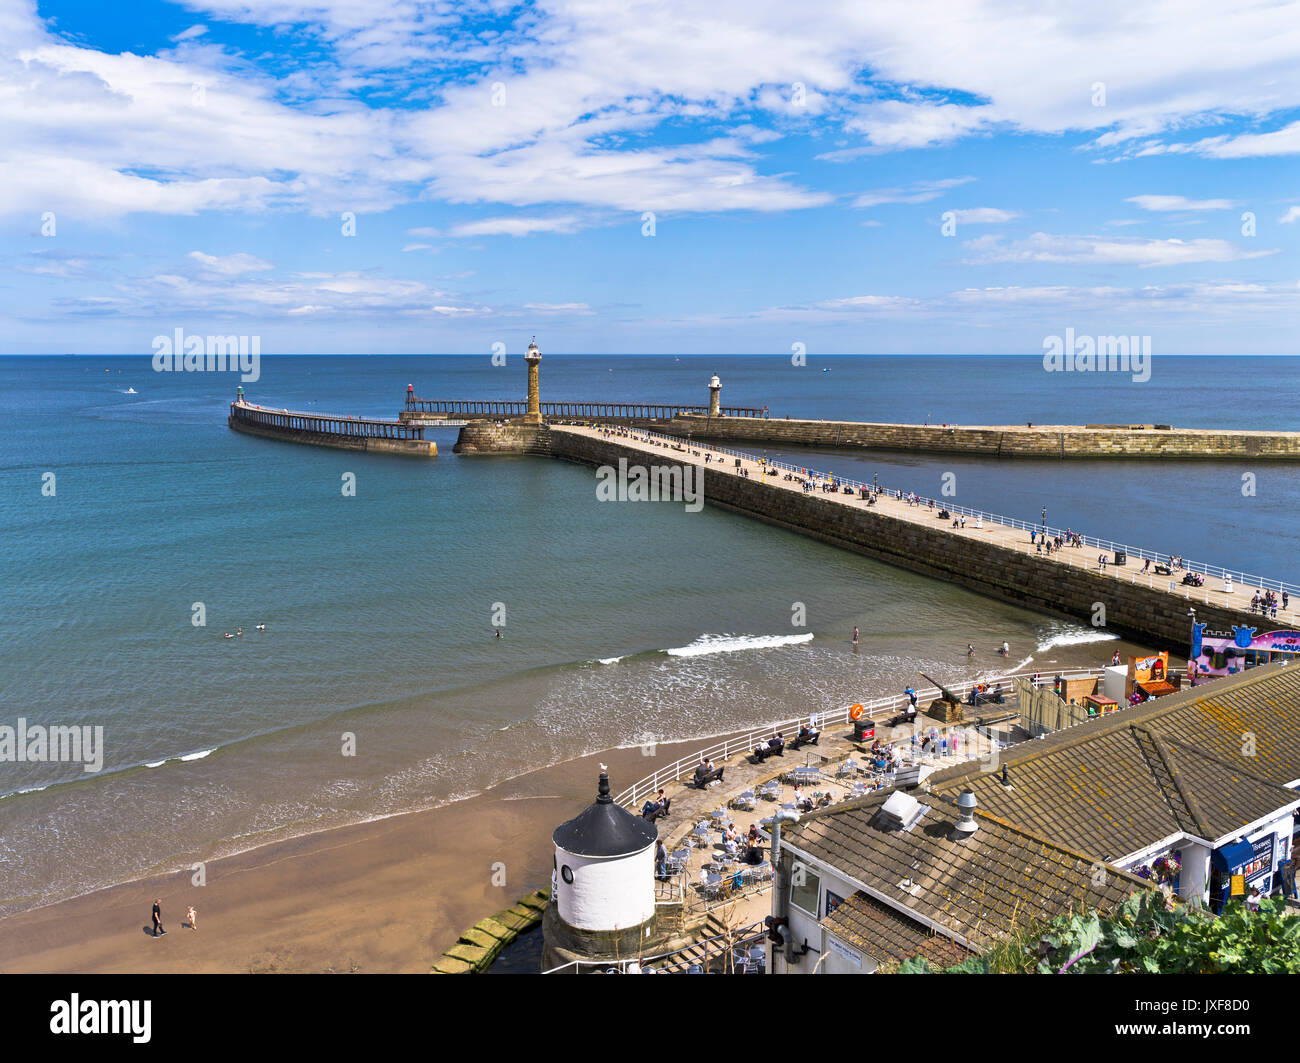 dh  WHITBY HARBOUR PIER NORTH YORKSHIRE UK Seafront seaside resort uk holiday resorts Stock Photo